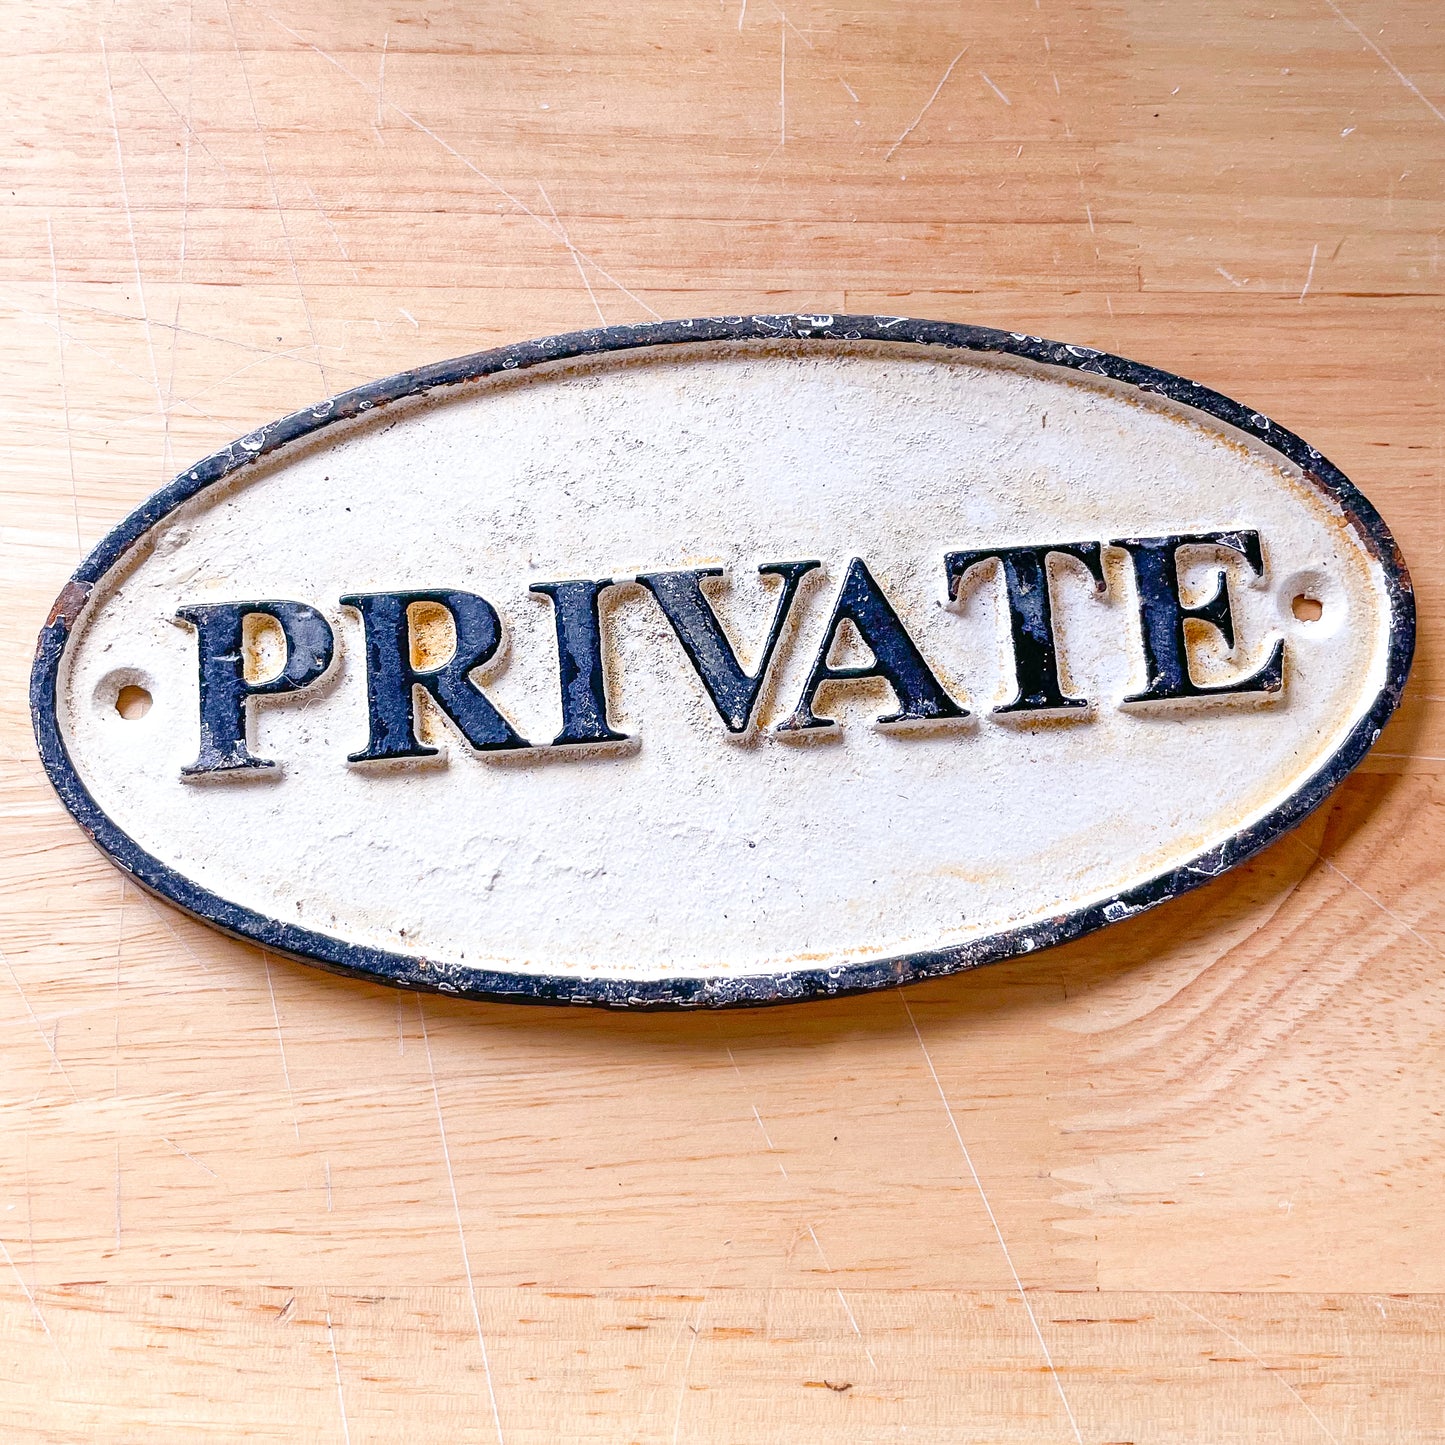 Private cast iron vintage wall hanging sign